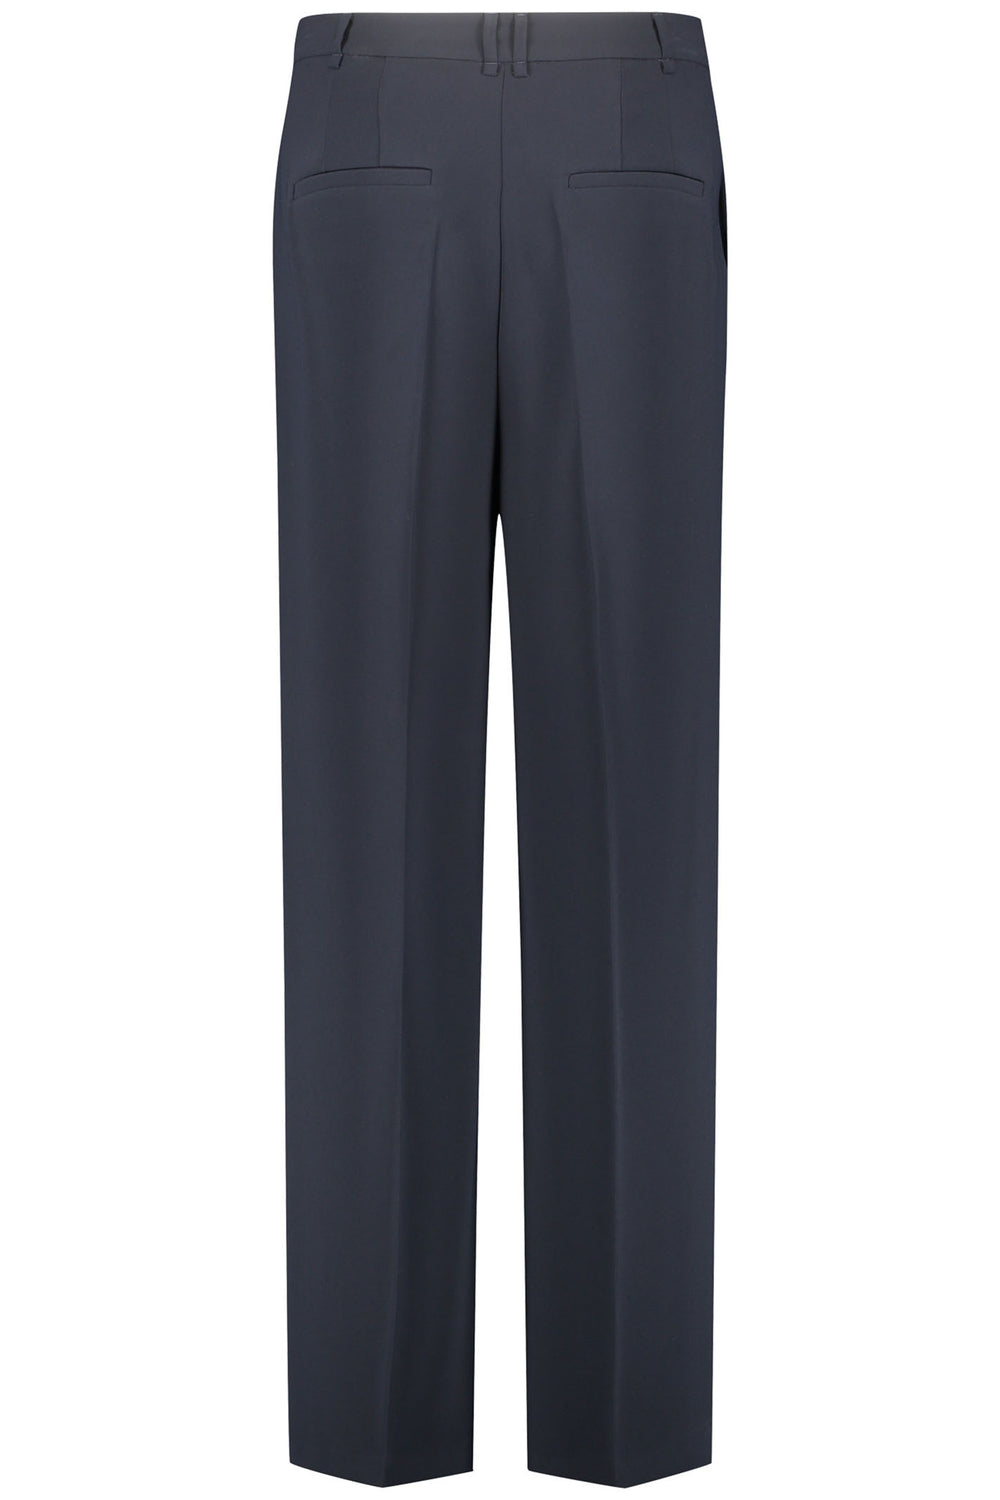 Gerry Weber 925044 71944 Navy Wide Leg Trousers - Experience Boutique